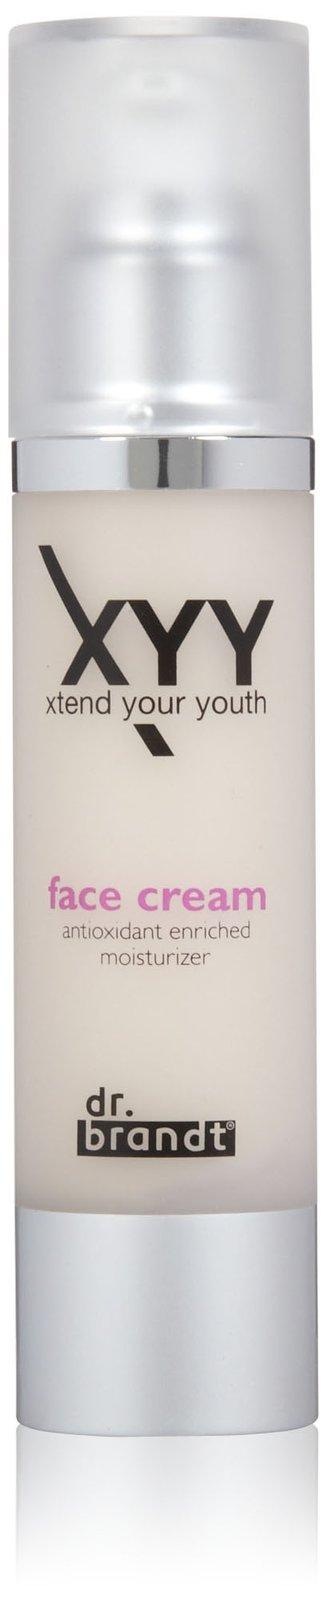 Dr. Brandt Xtend Your Youth Face Cream